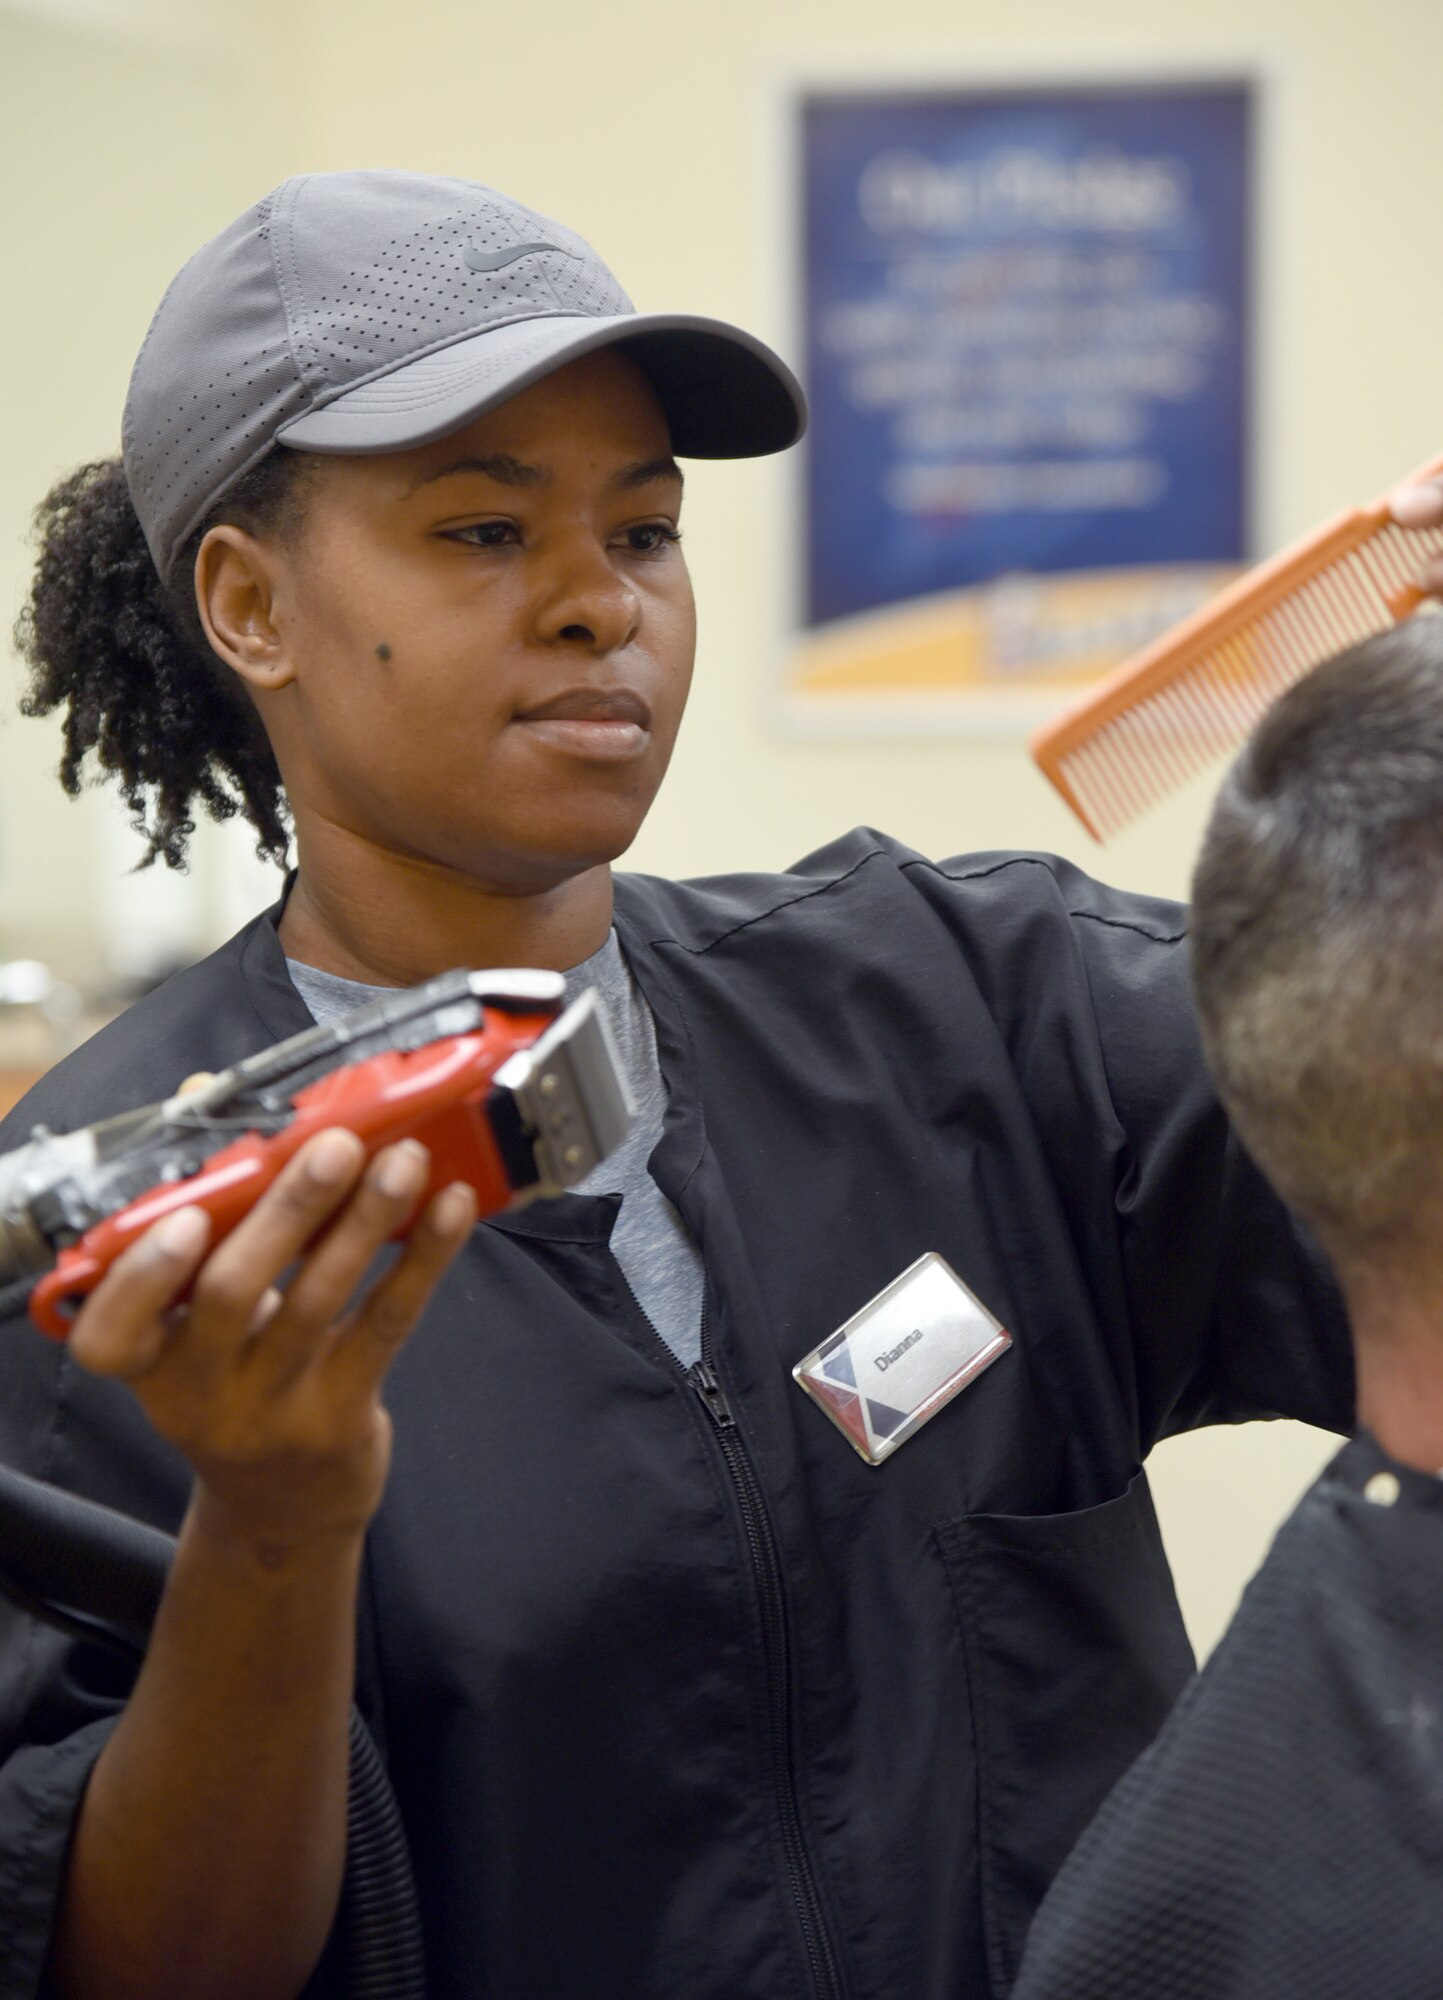 Dianna Colbert is a hair stylist at the barber shop inside the Tinker Exchange and has worked here for 10 years.